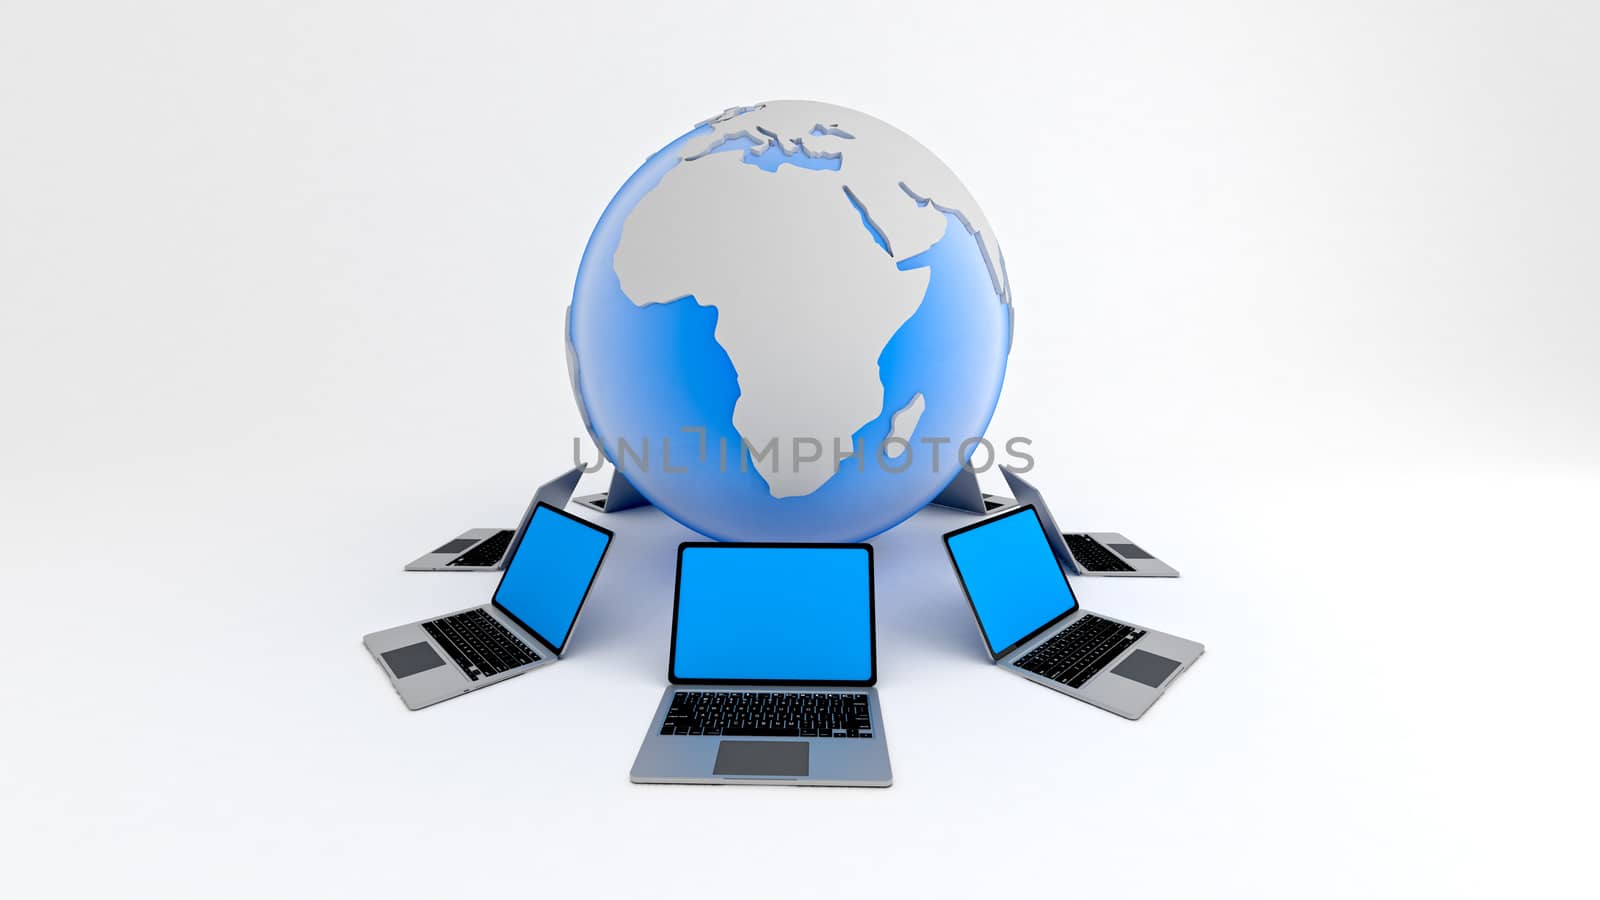 Laptops around globe. Global network concept. by klss